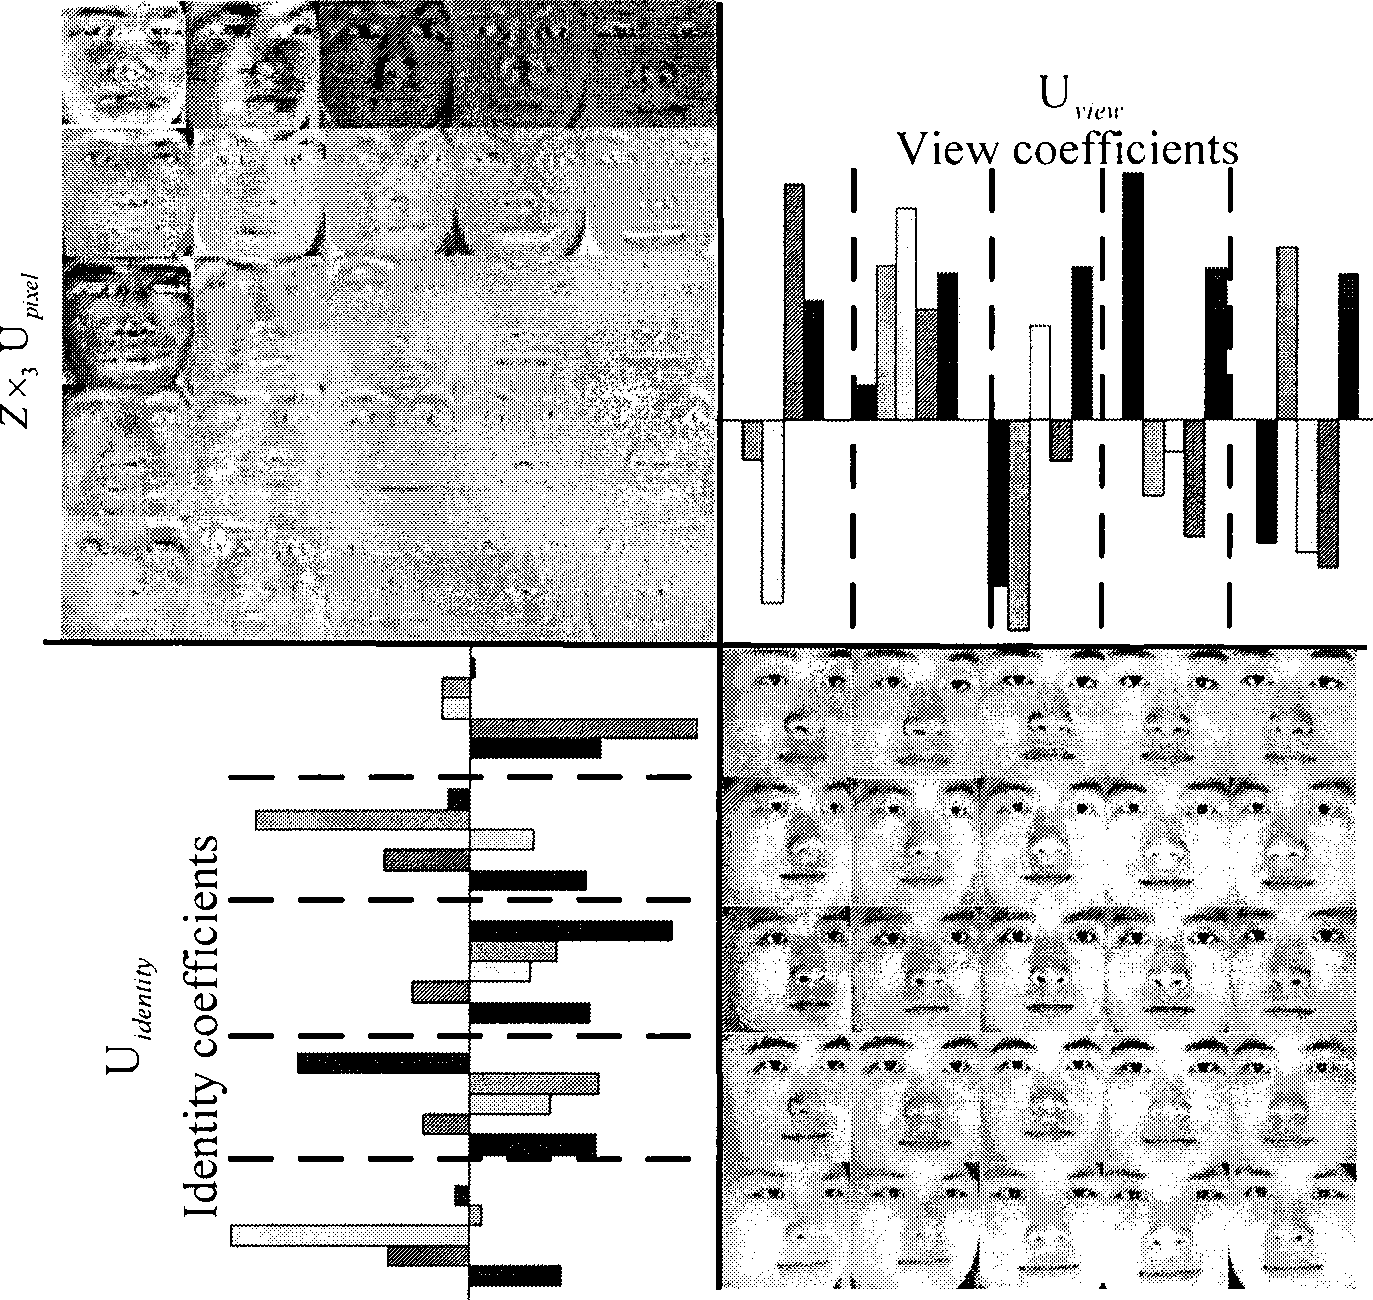 Multi-view angle human face recognizing method based on non-linear tensor resolution and view angle manifold